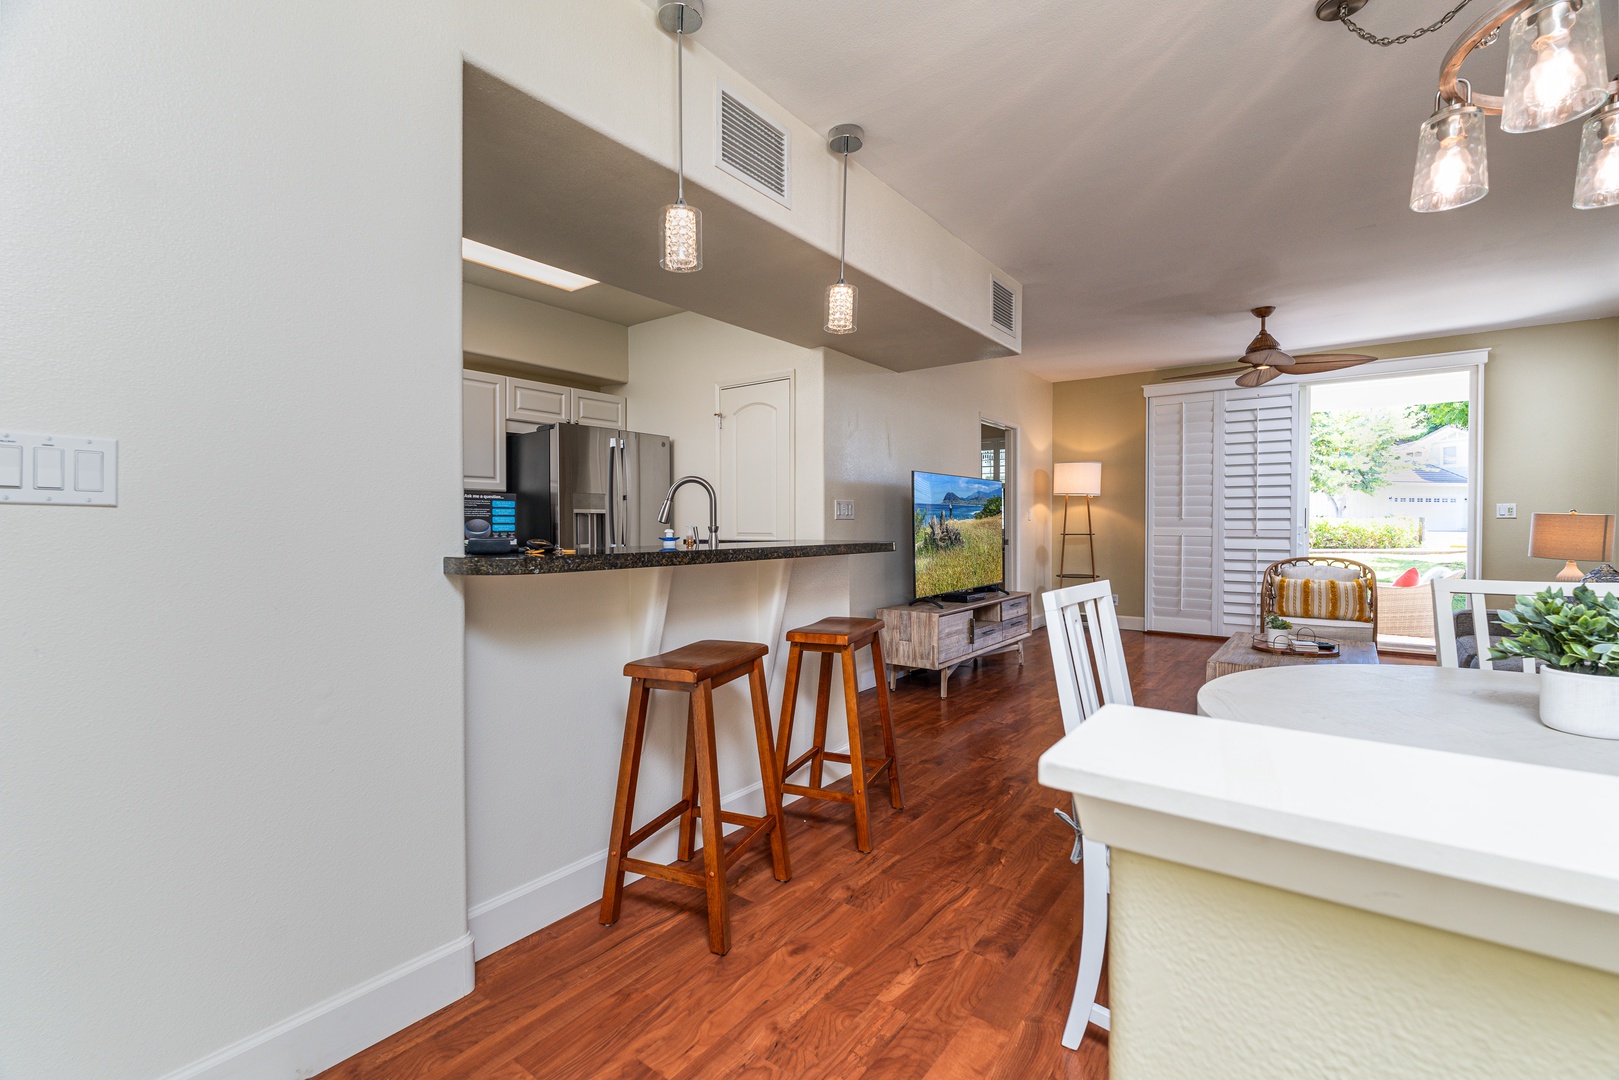 Kapolei Vacation Rentals, Ko Olina Kai 1105F - Highlighting the breakfast bar of the kitchen for quick meals or entertainment.